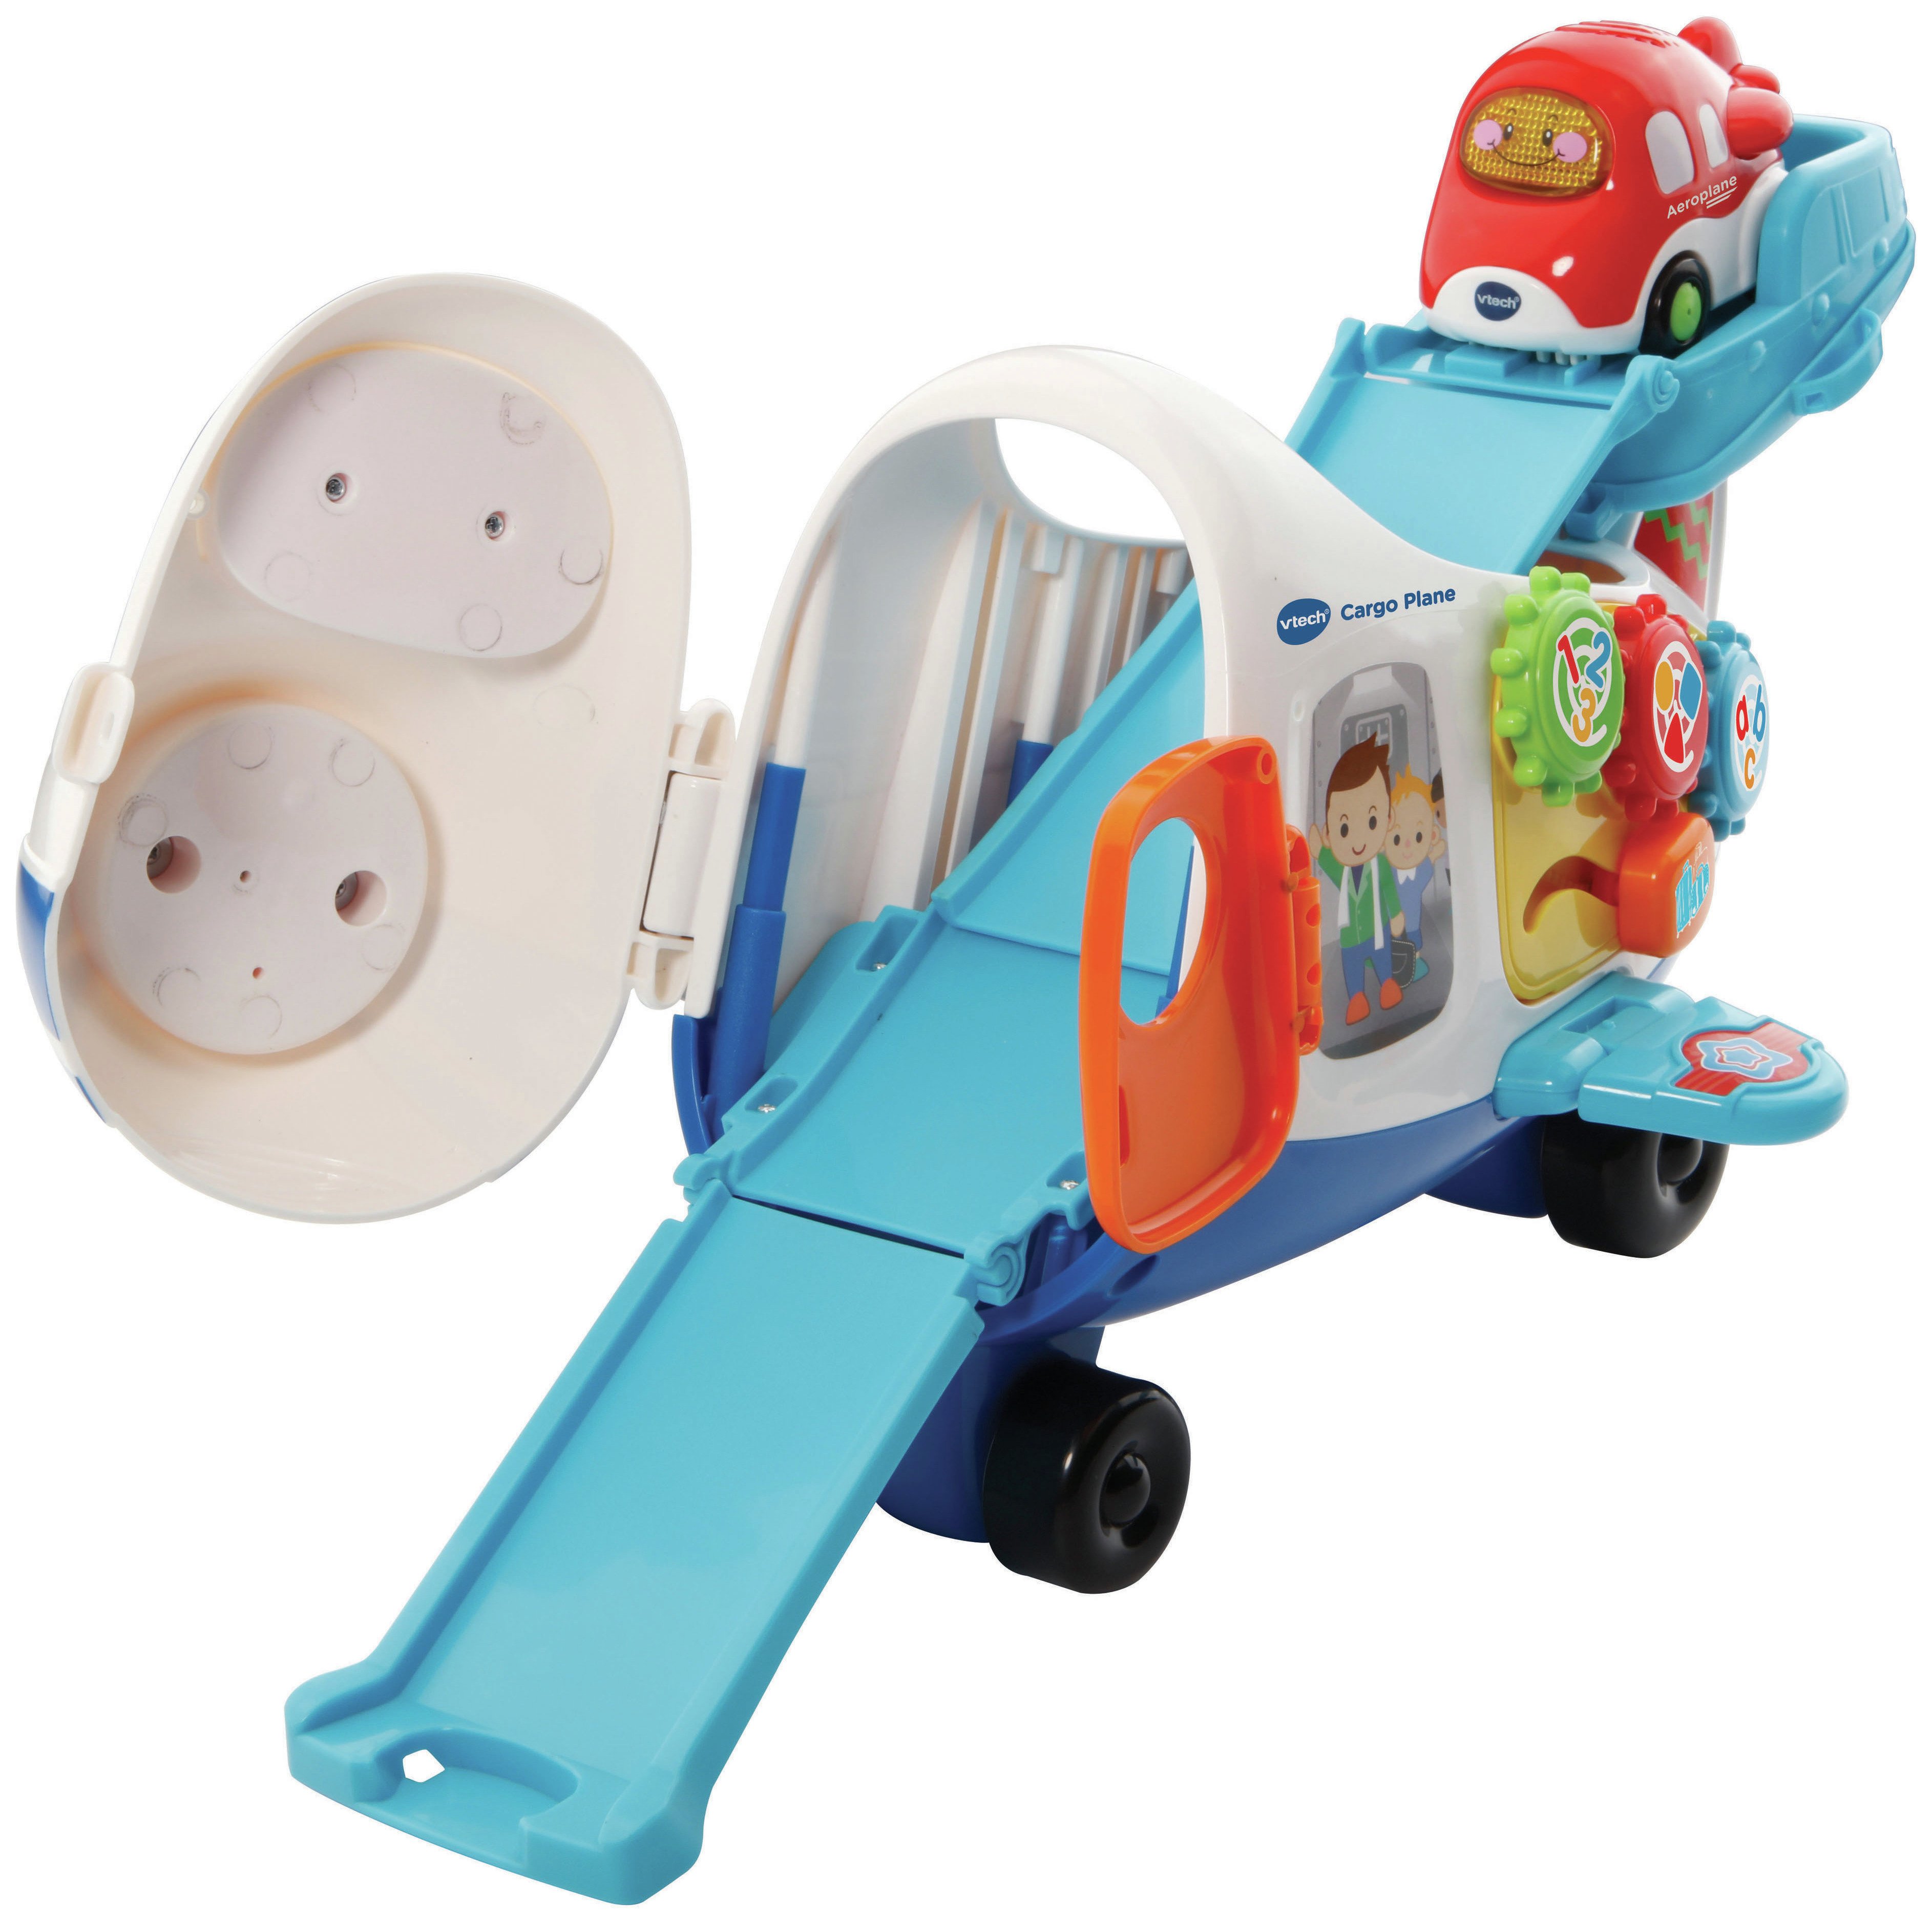 Review of VTech Toot-Toot Drivers Cargo Plane